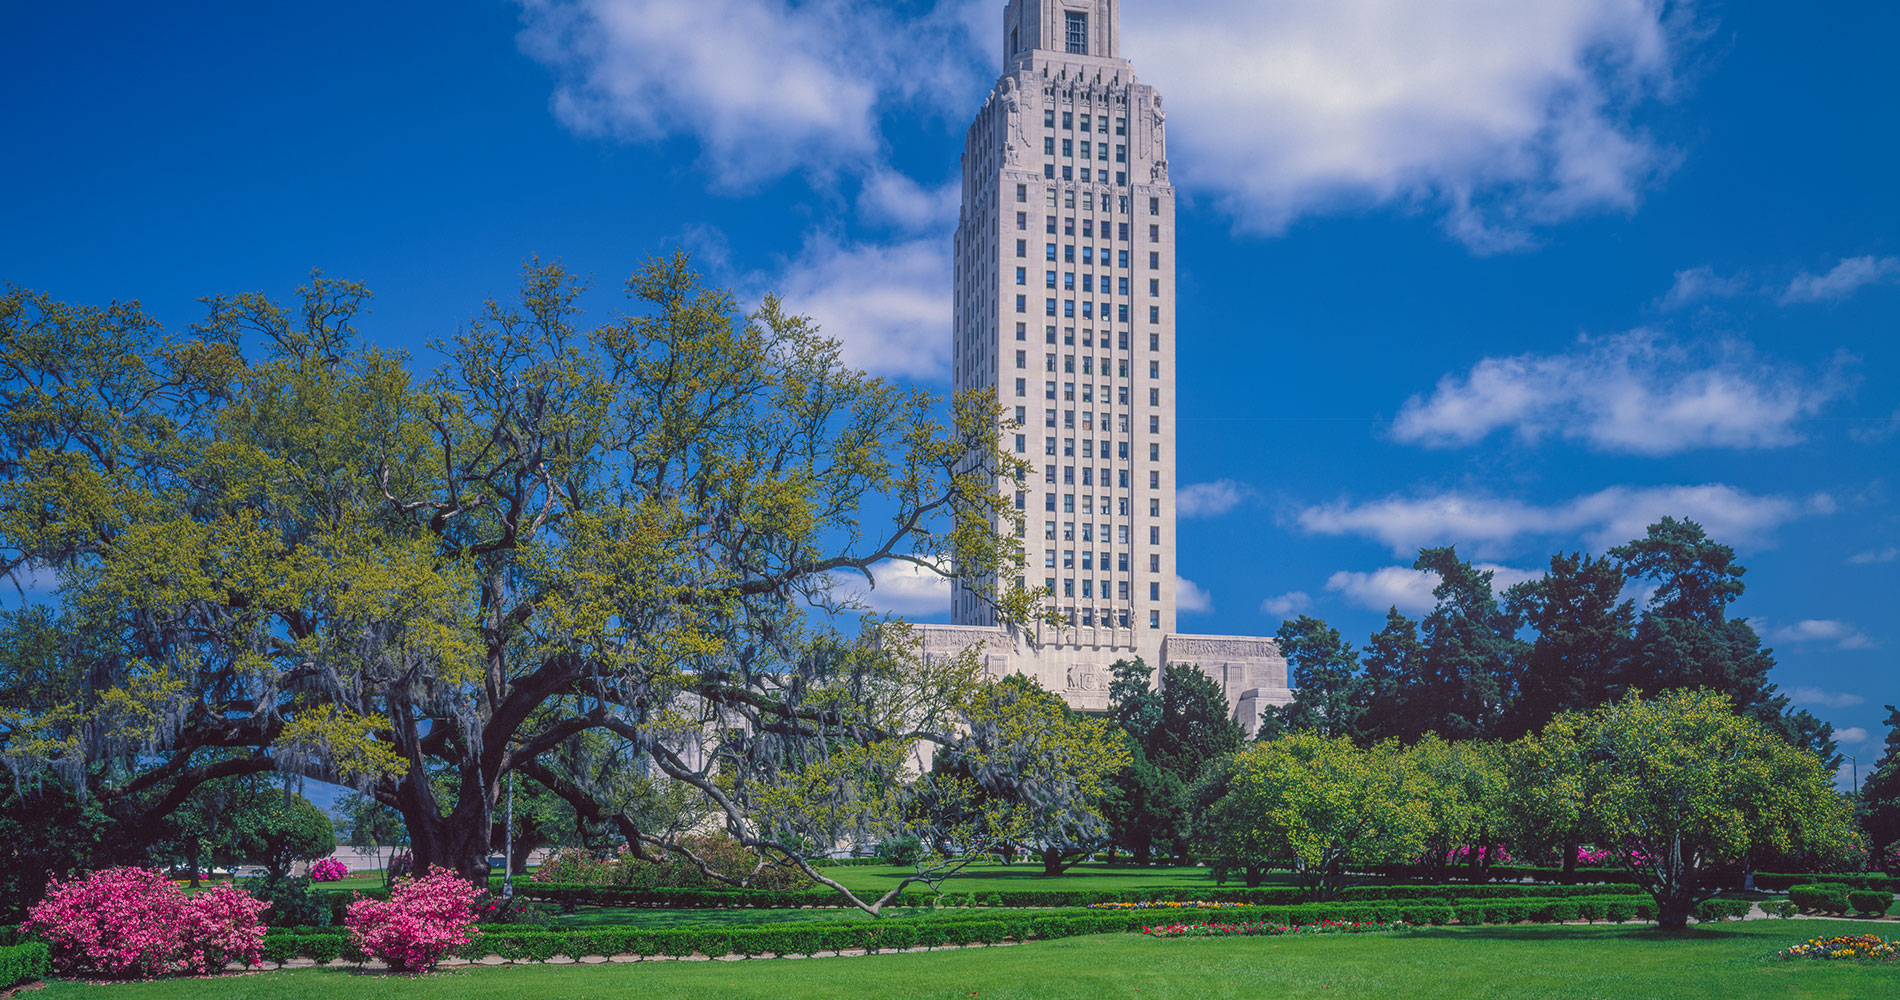 Flowers and trees, and the view of State Capitol from State Capitol Gardens